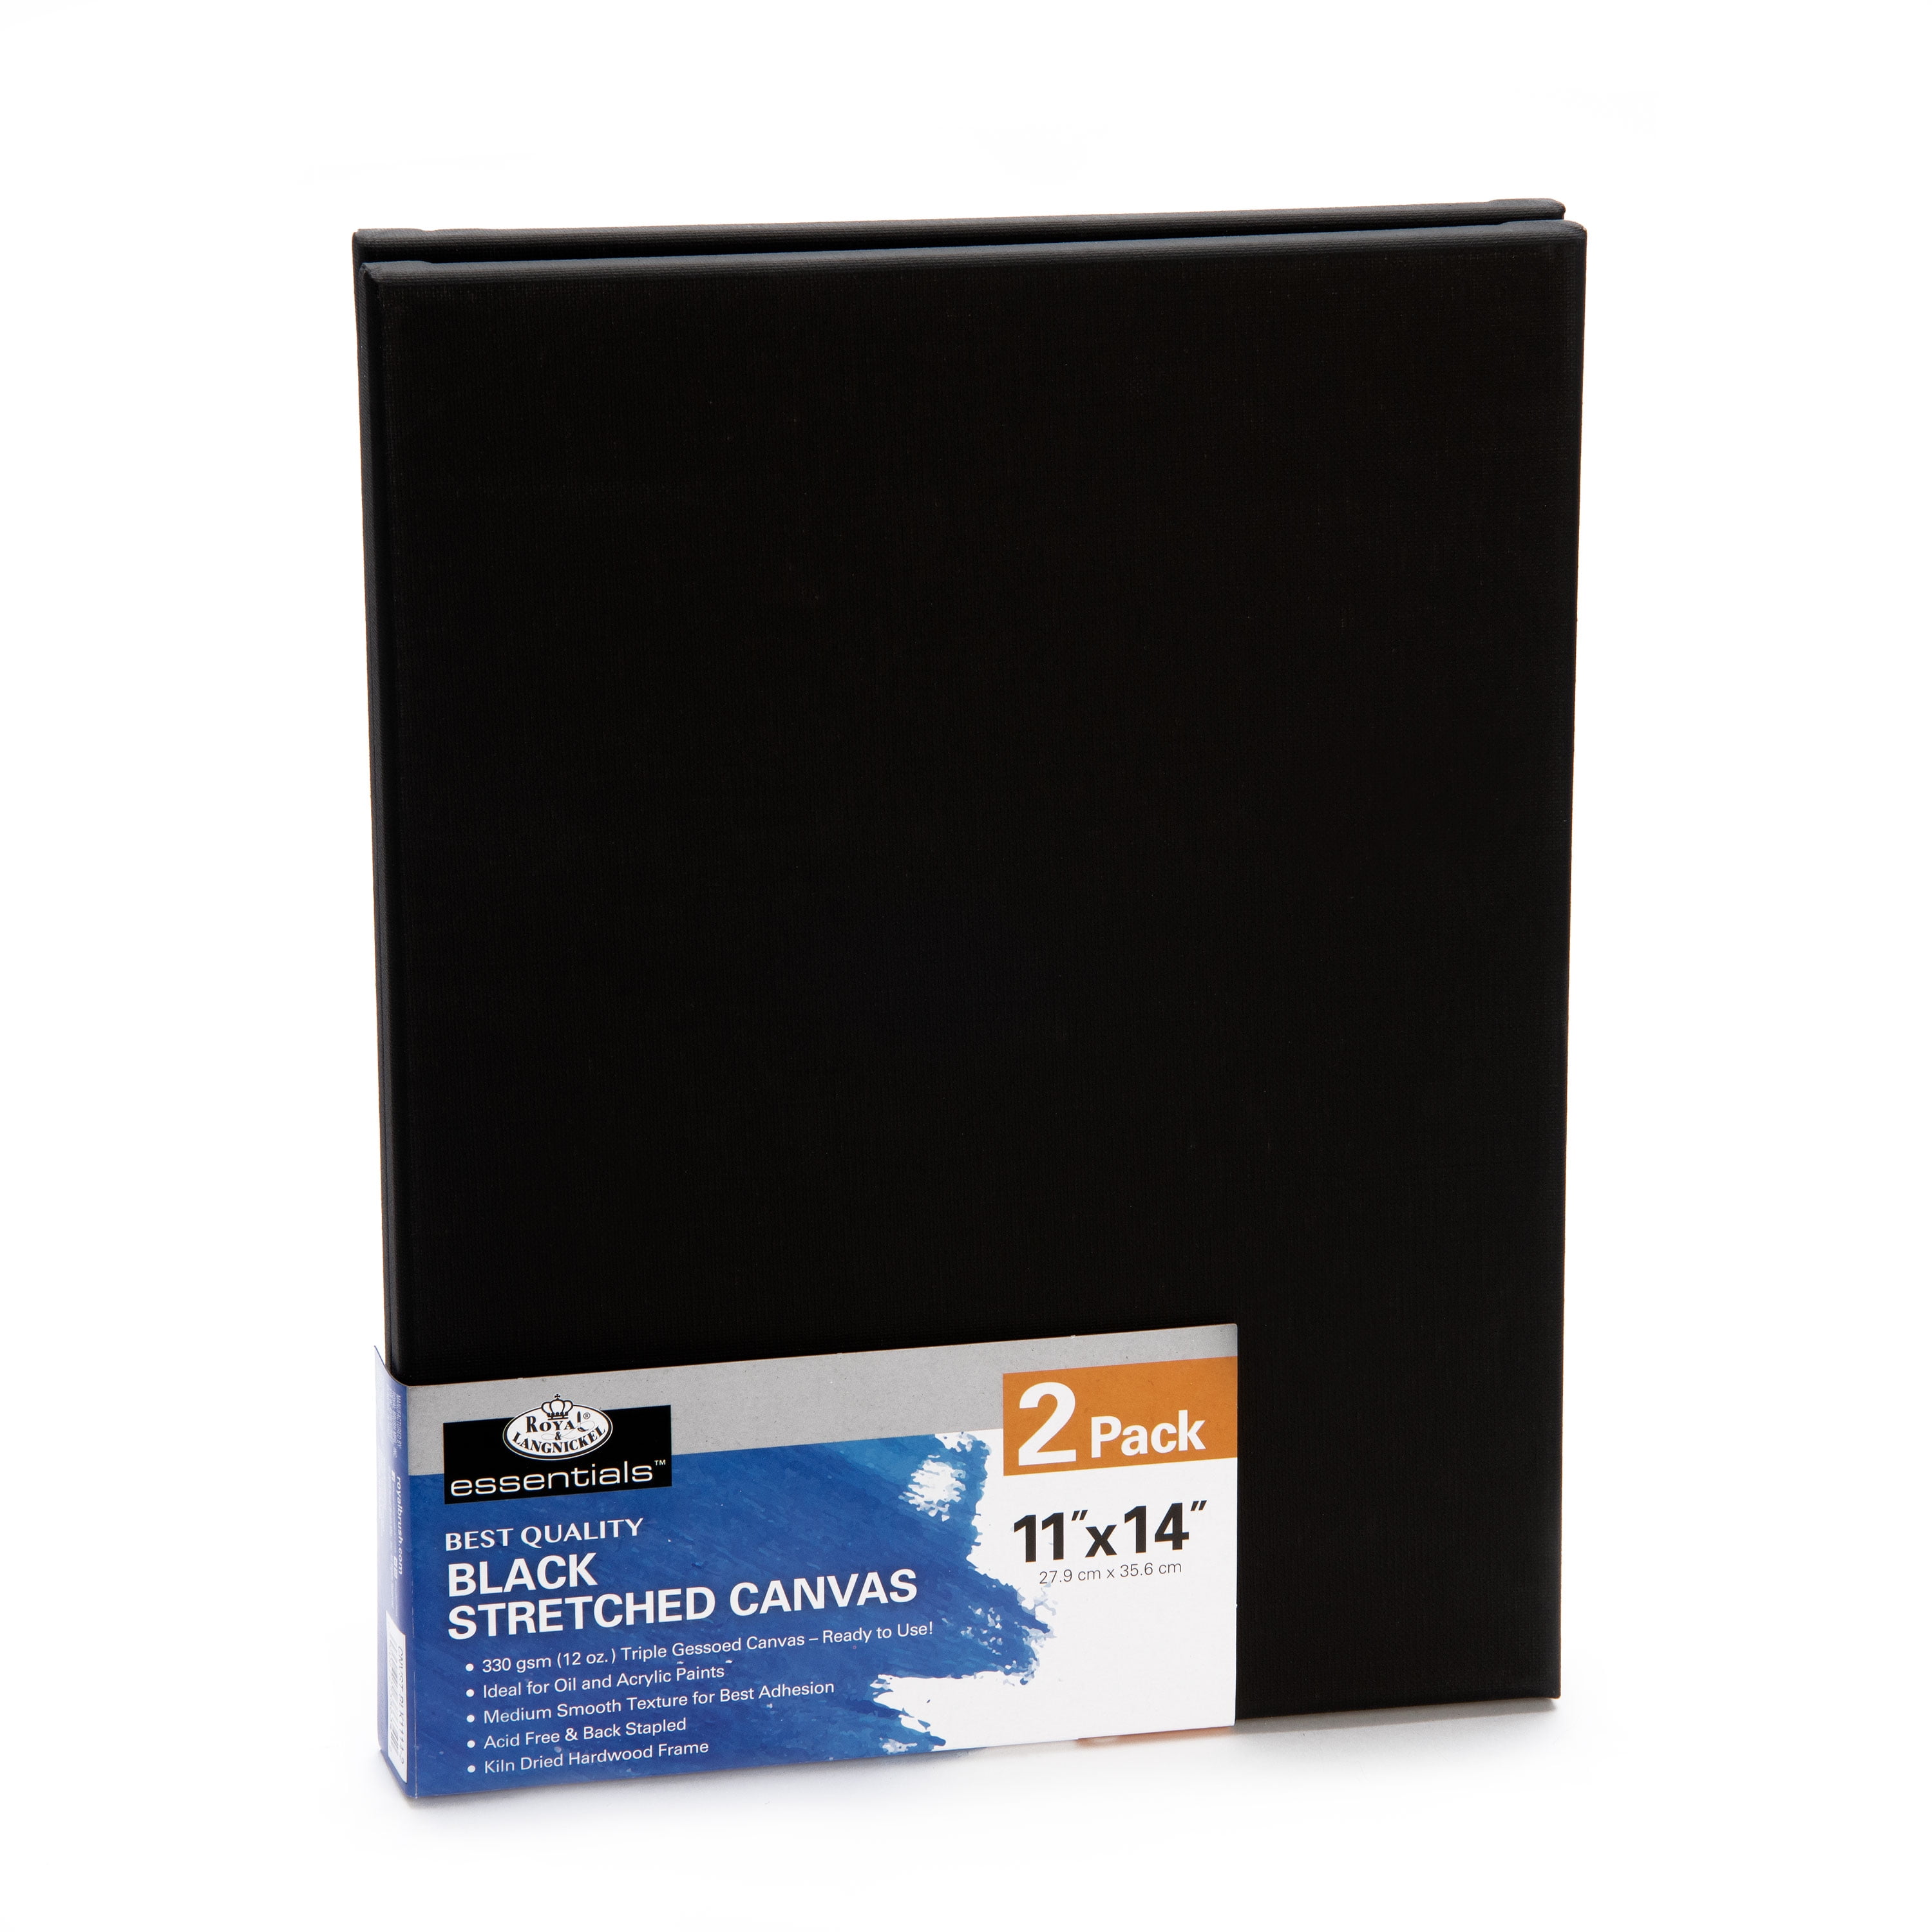 Royal & Langnickel Essentials 11x14 Black Triple Gessoed Stretched Canvas Value Pack, for Oil and Acrylic Painting, 4 Pack